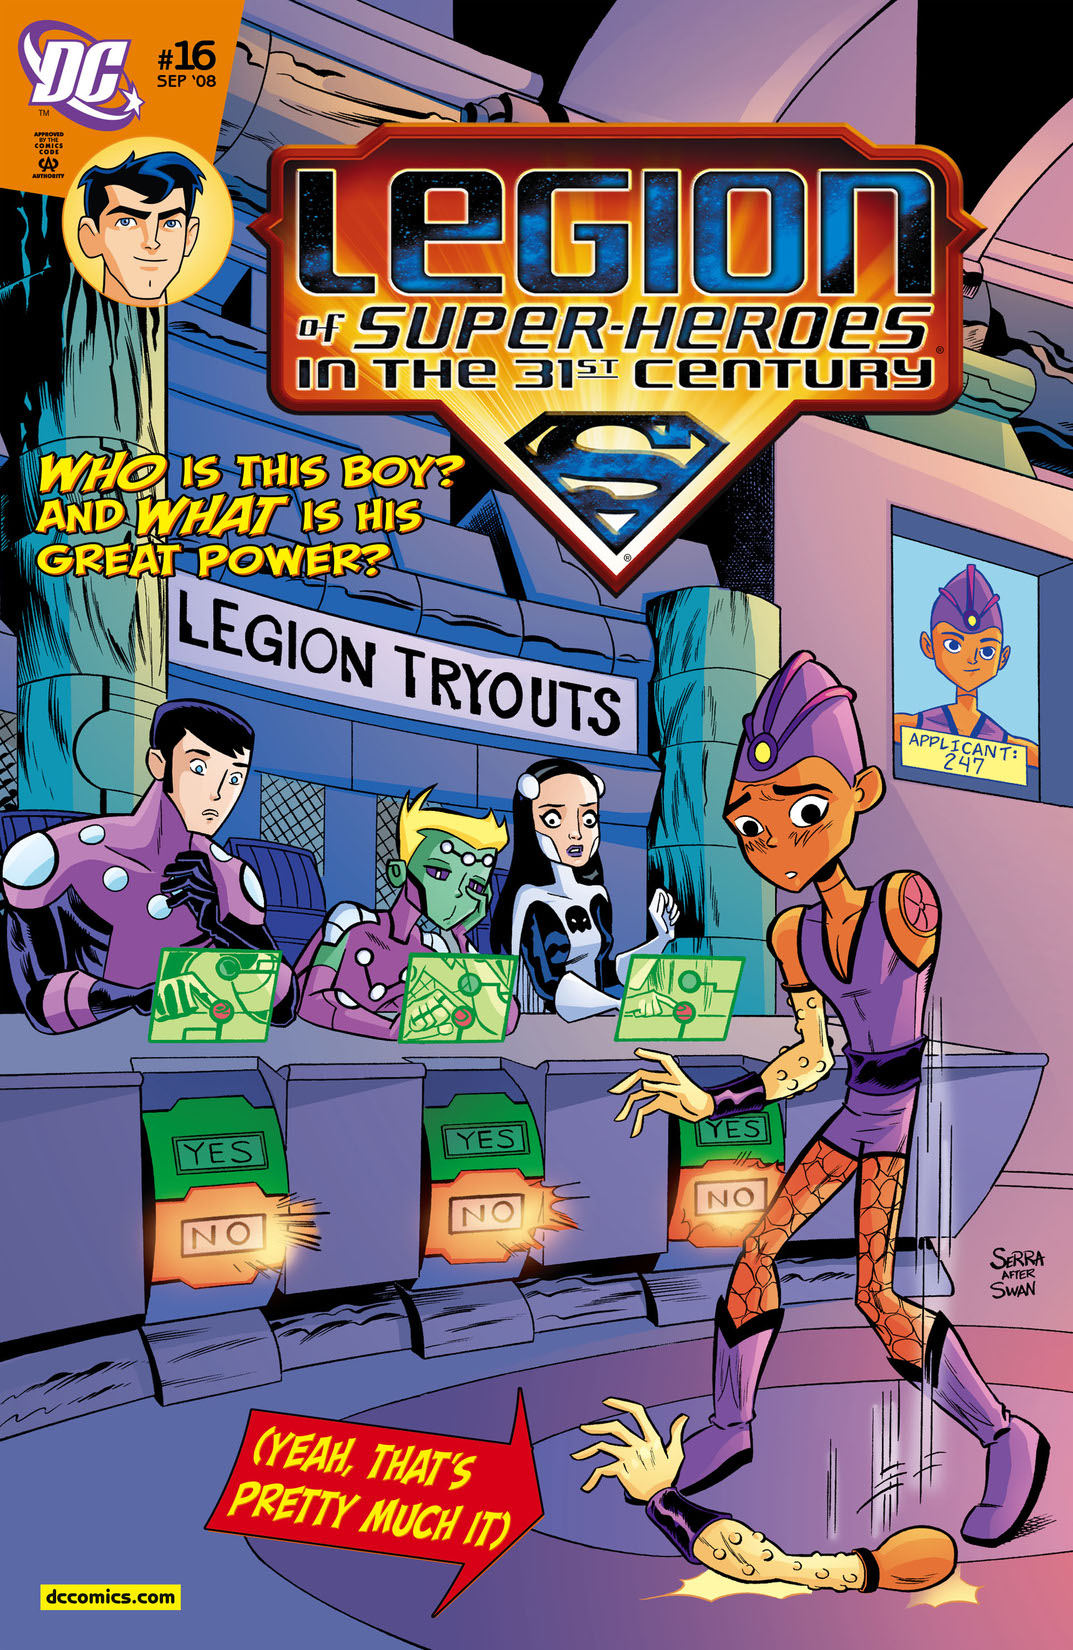 The Legion of Super-heroes in the 31st Century #16 preview images